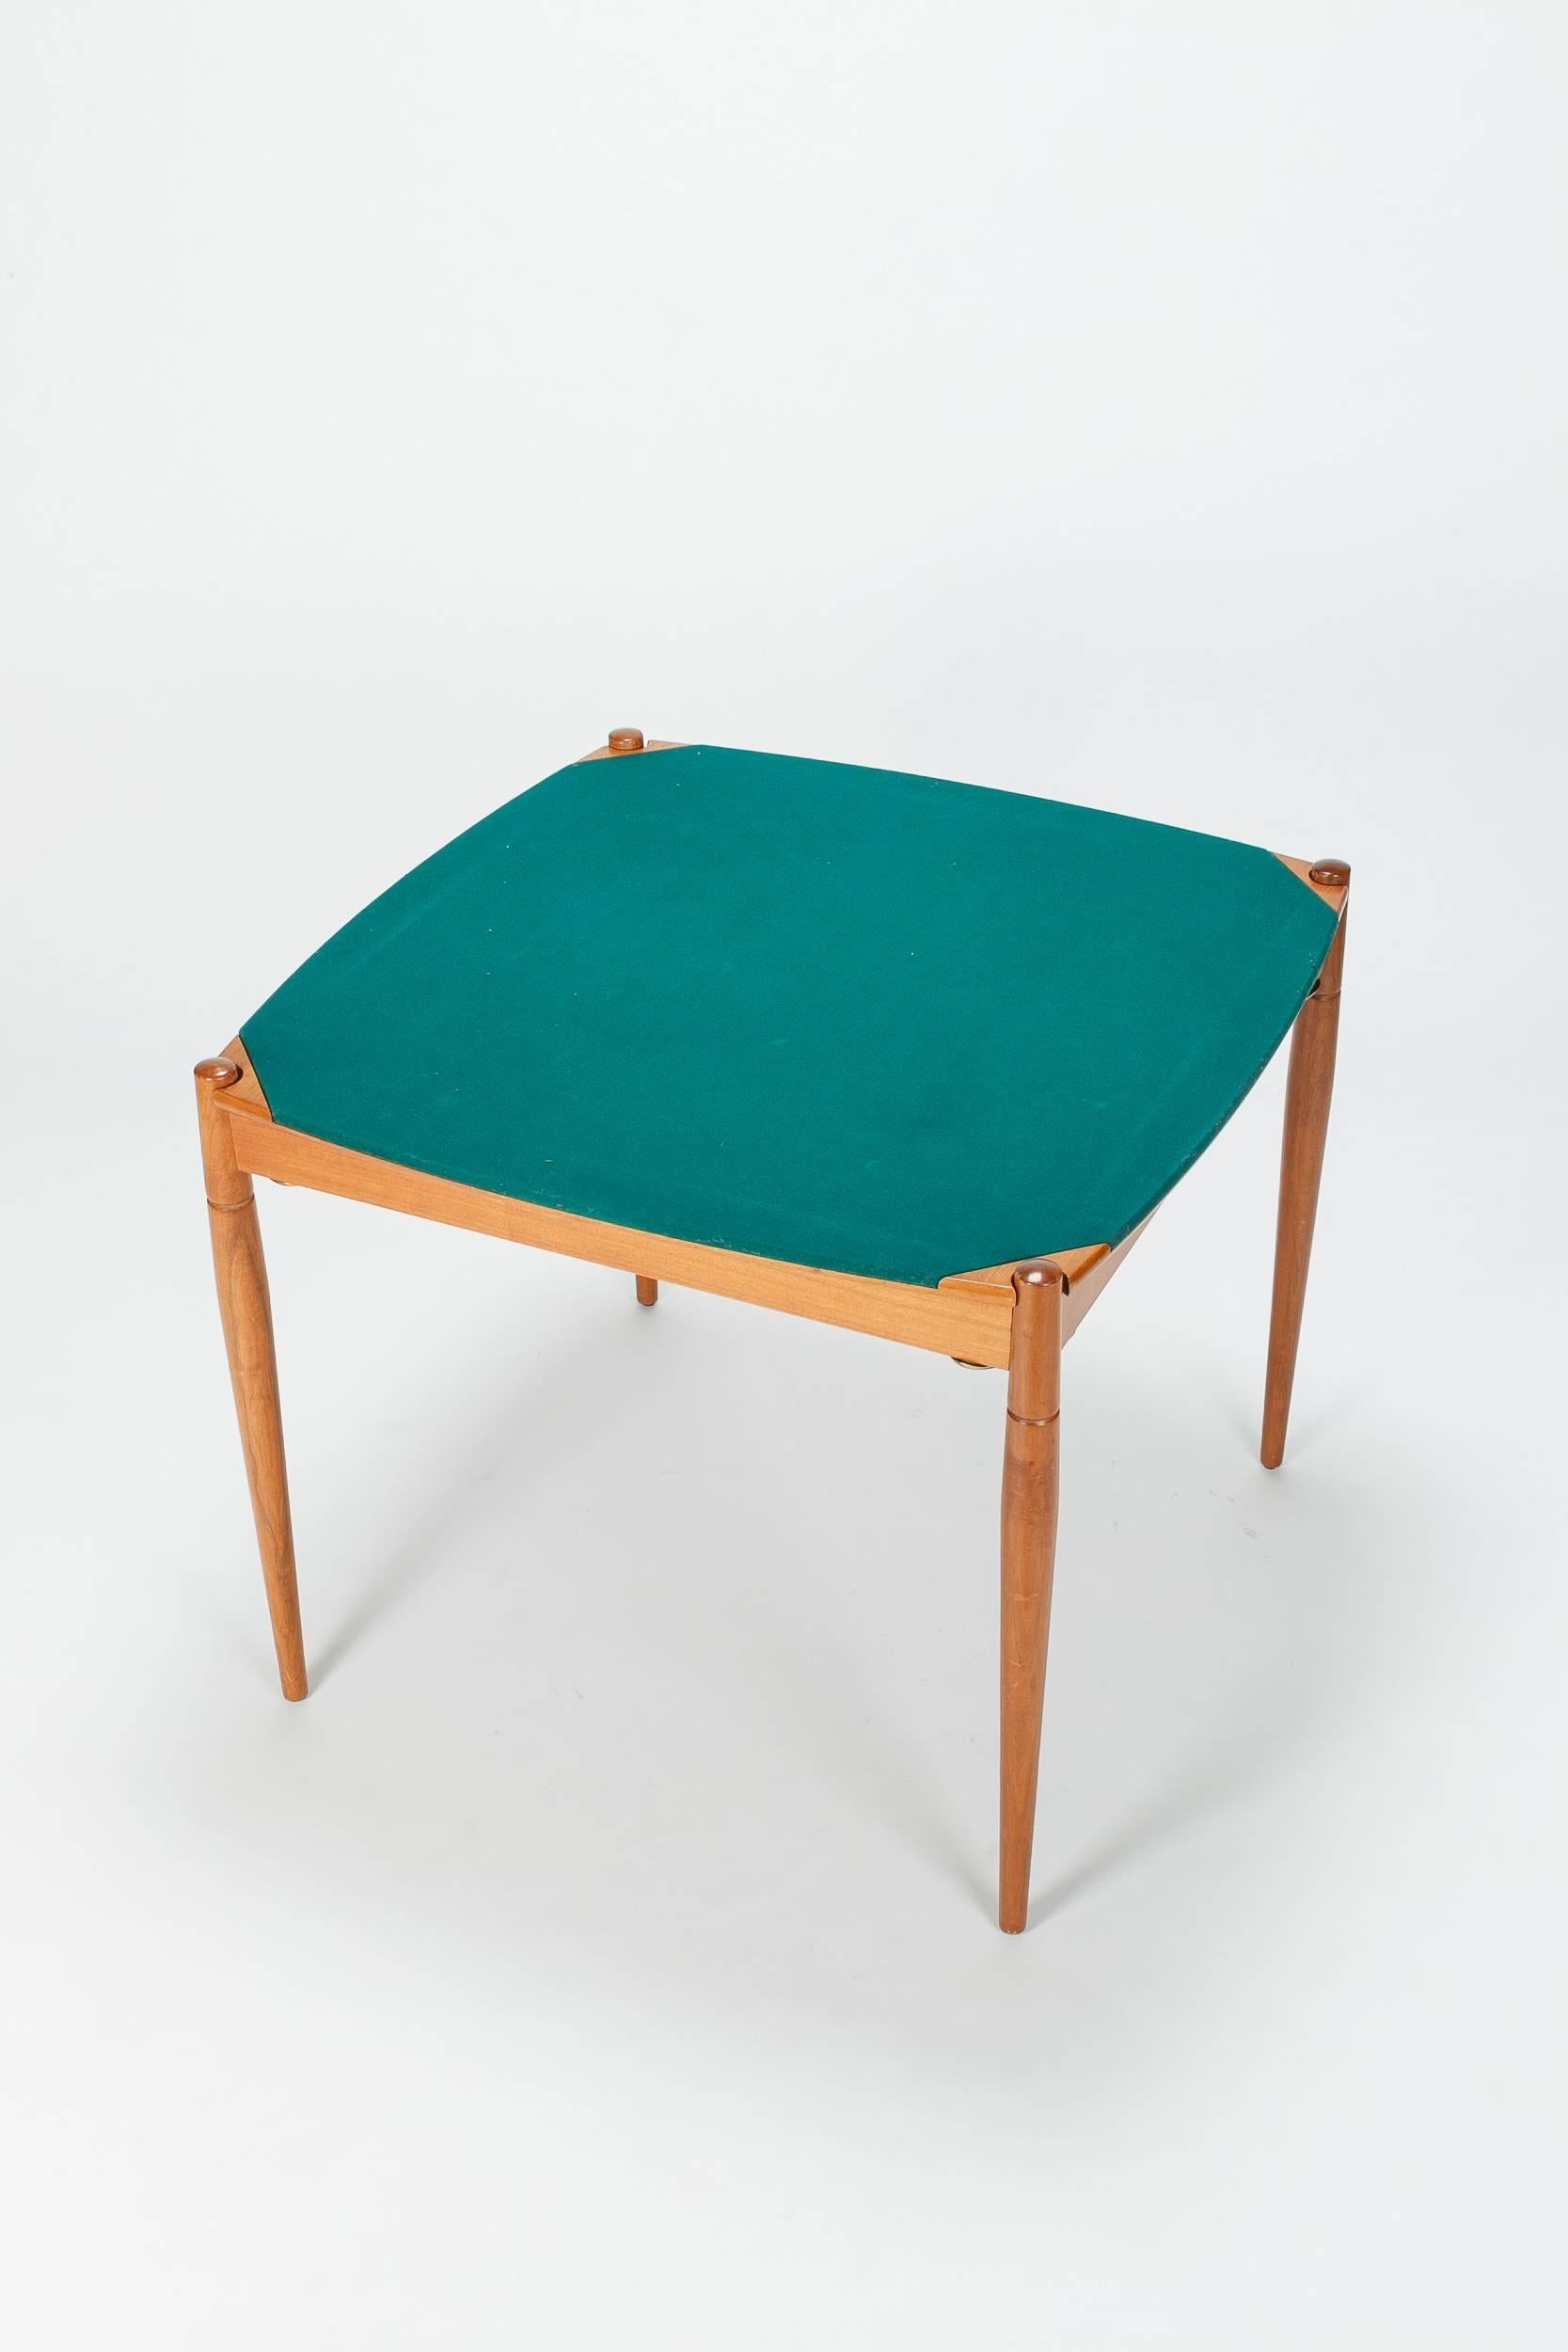 Mid-Century Modern Italian Game Table by Gio Ponti for Fratelli Reguitti, 1958